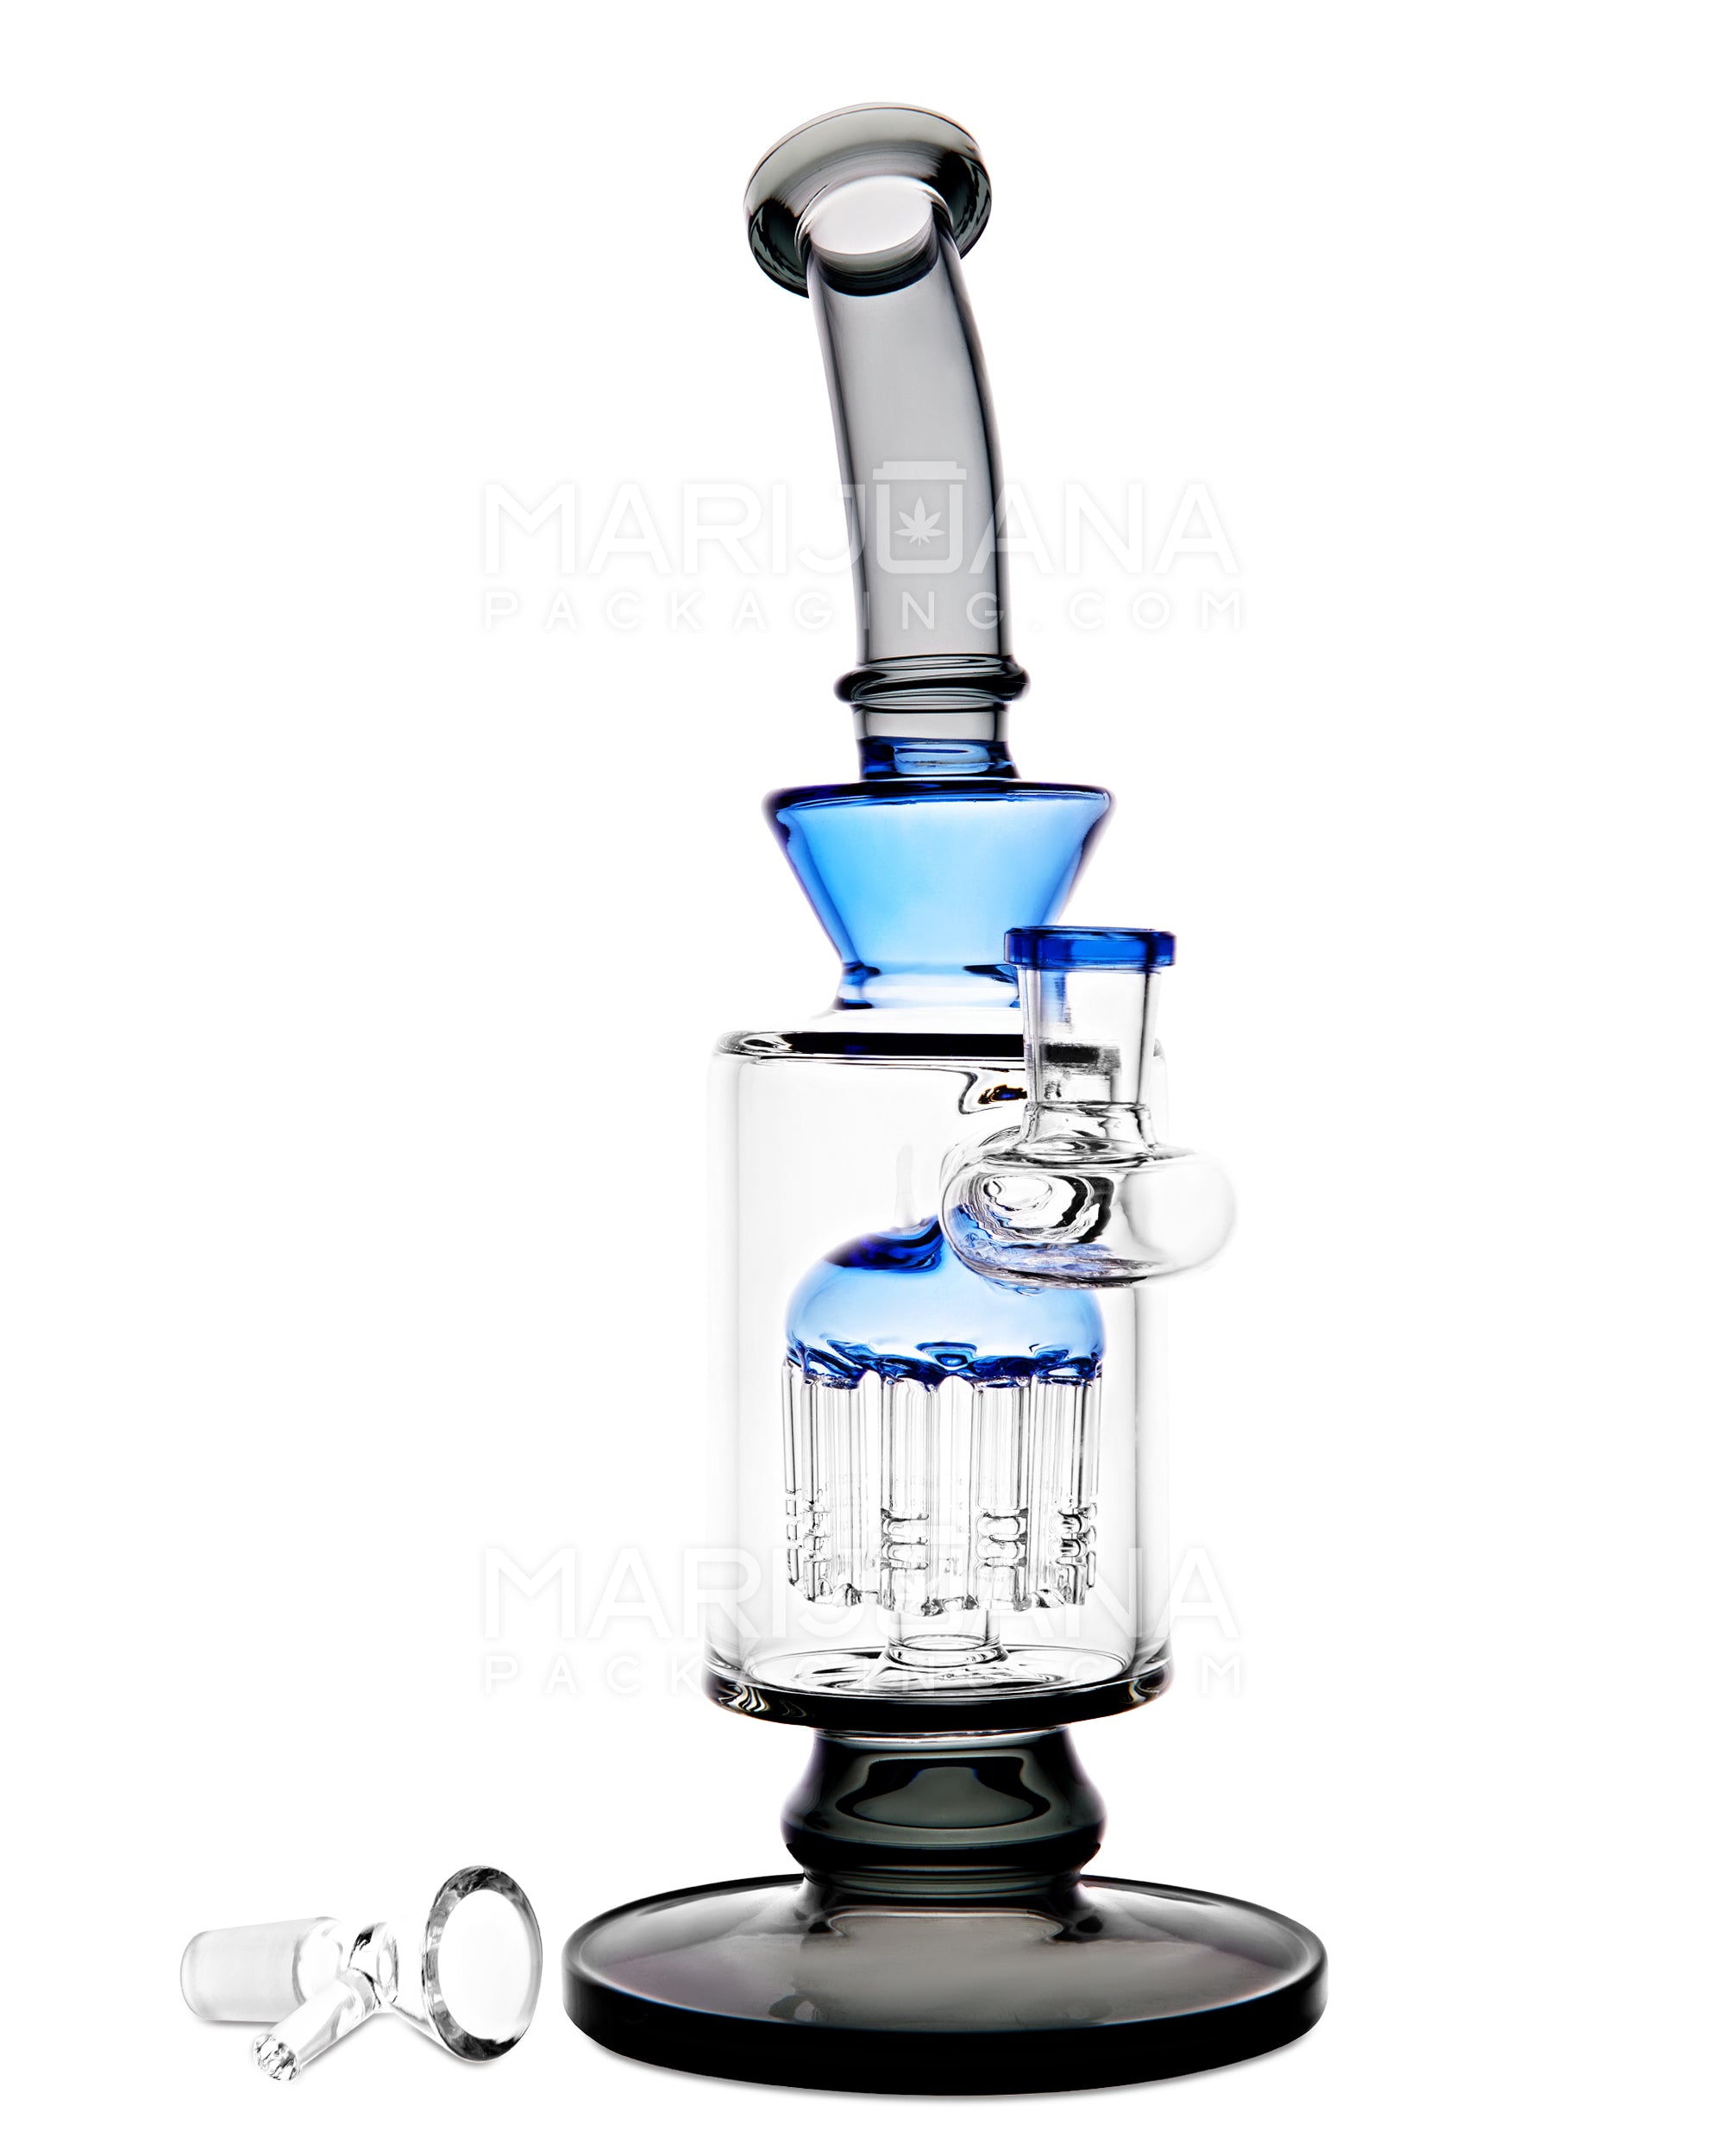 Bent Neck Tree Perc Color Trim Glass Water Pipe w/ Thick Base | 10.5in Tall - 14mm Bowl - Black - 2